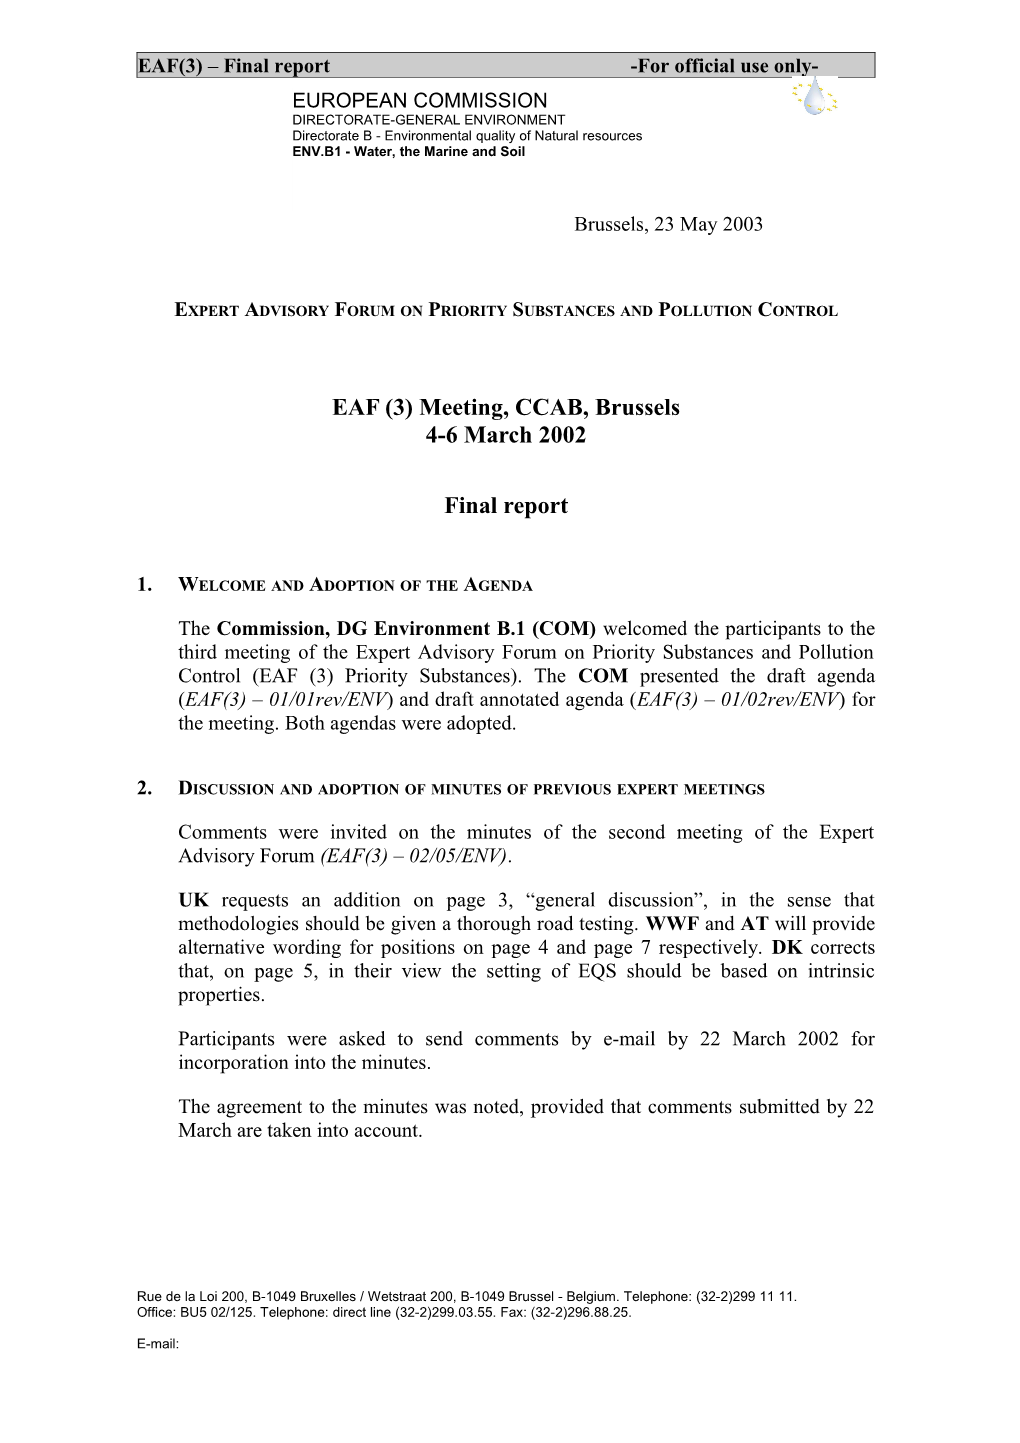 EAF(3) Final Report -For Official Use Only